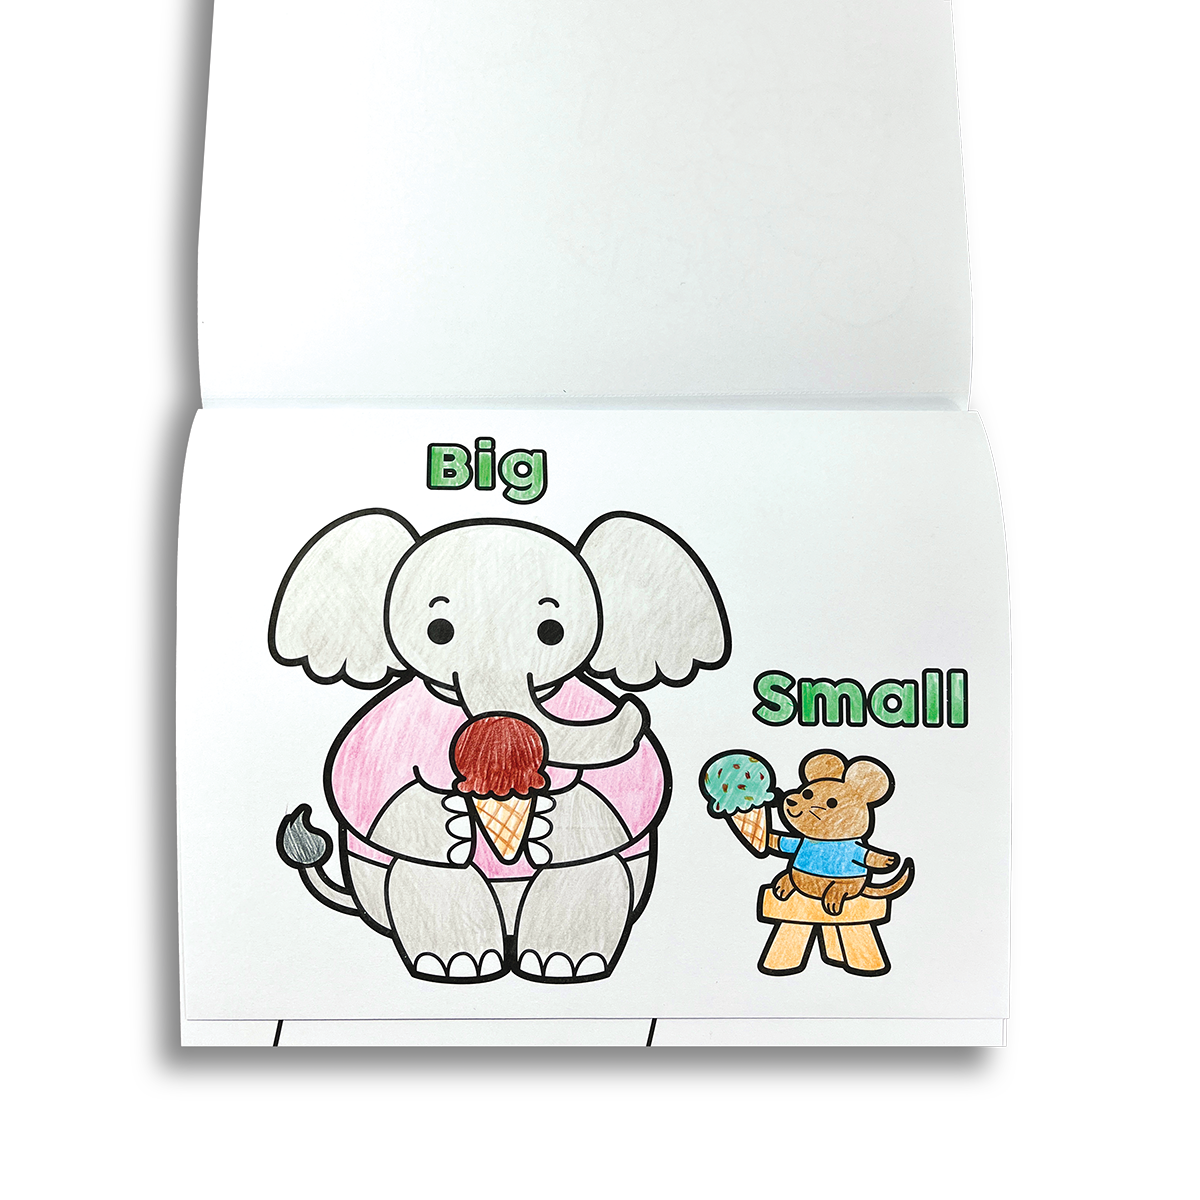 Baby Coloring Book 1 year Dog and Puppy: My first jumbo coloring